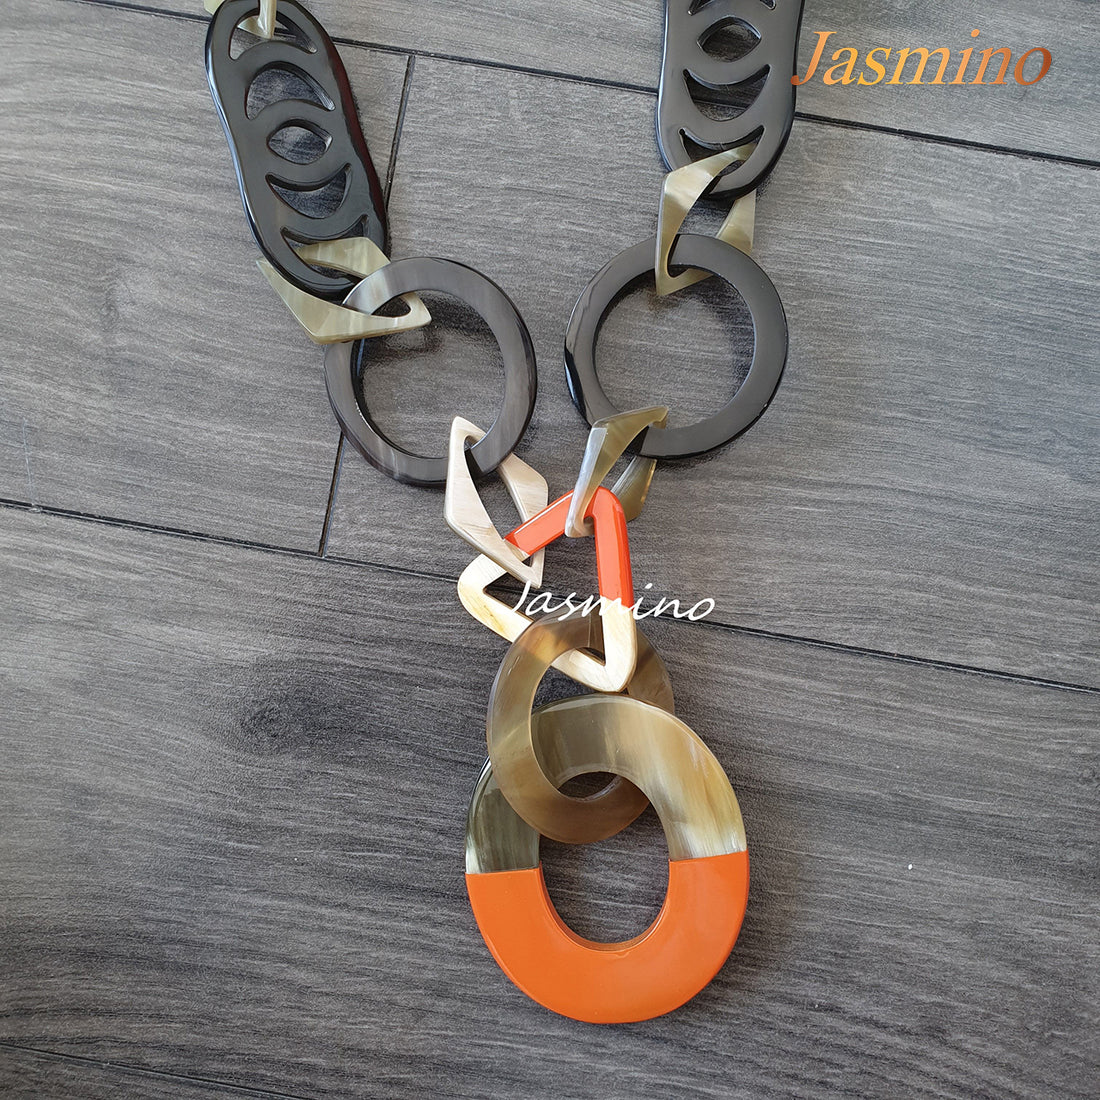 The necklace has large pieces with half natural horn and half orange peel lacquer, unique gift for her